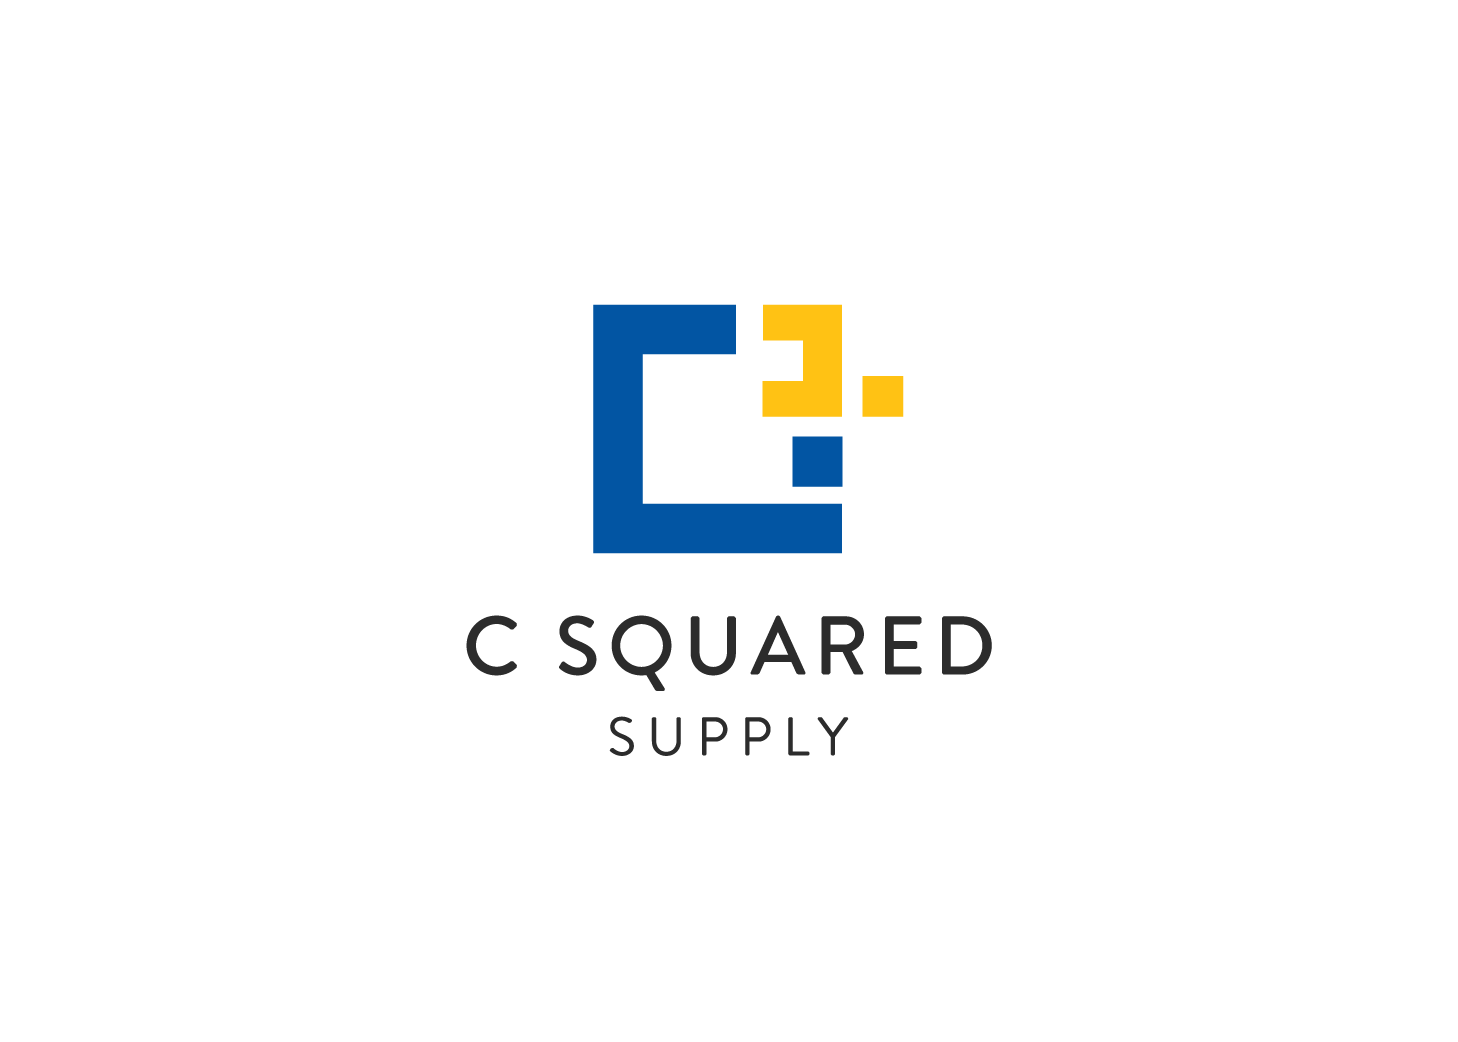 Square D Logo - Serious, Professional, Business Logo Design for C Squared Supply ...